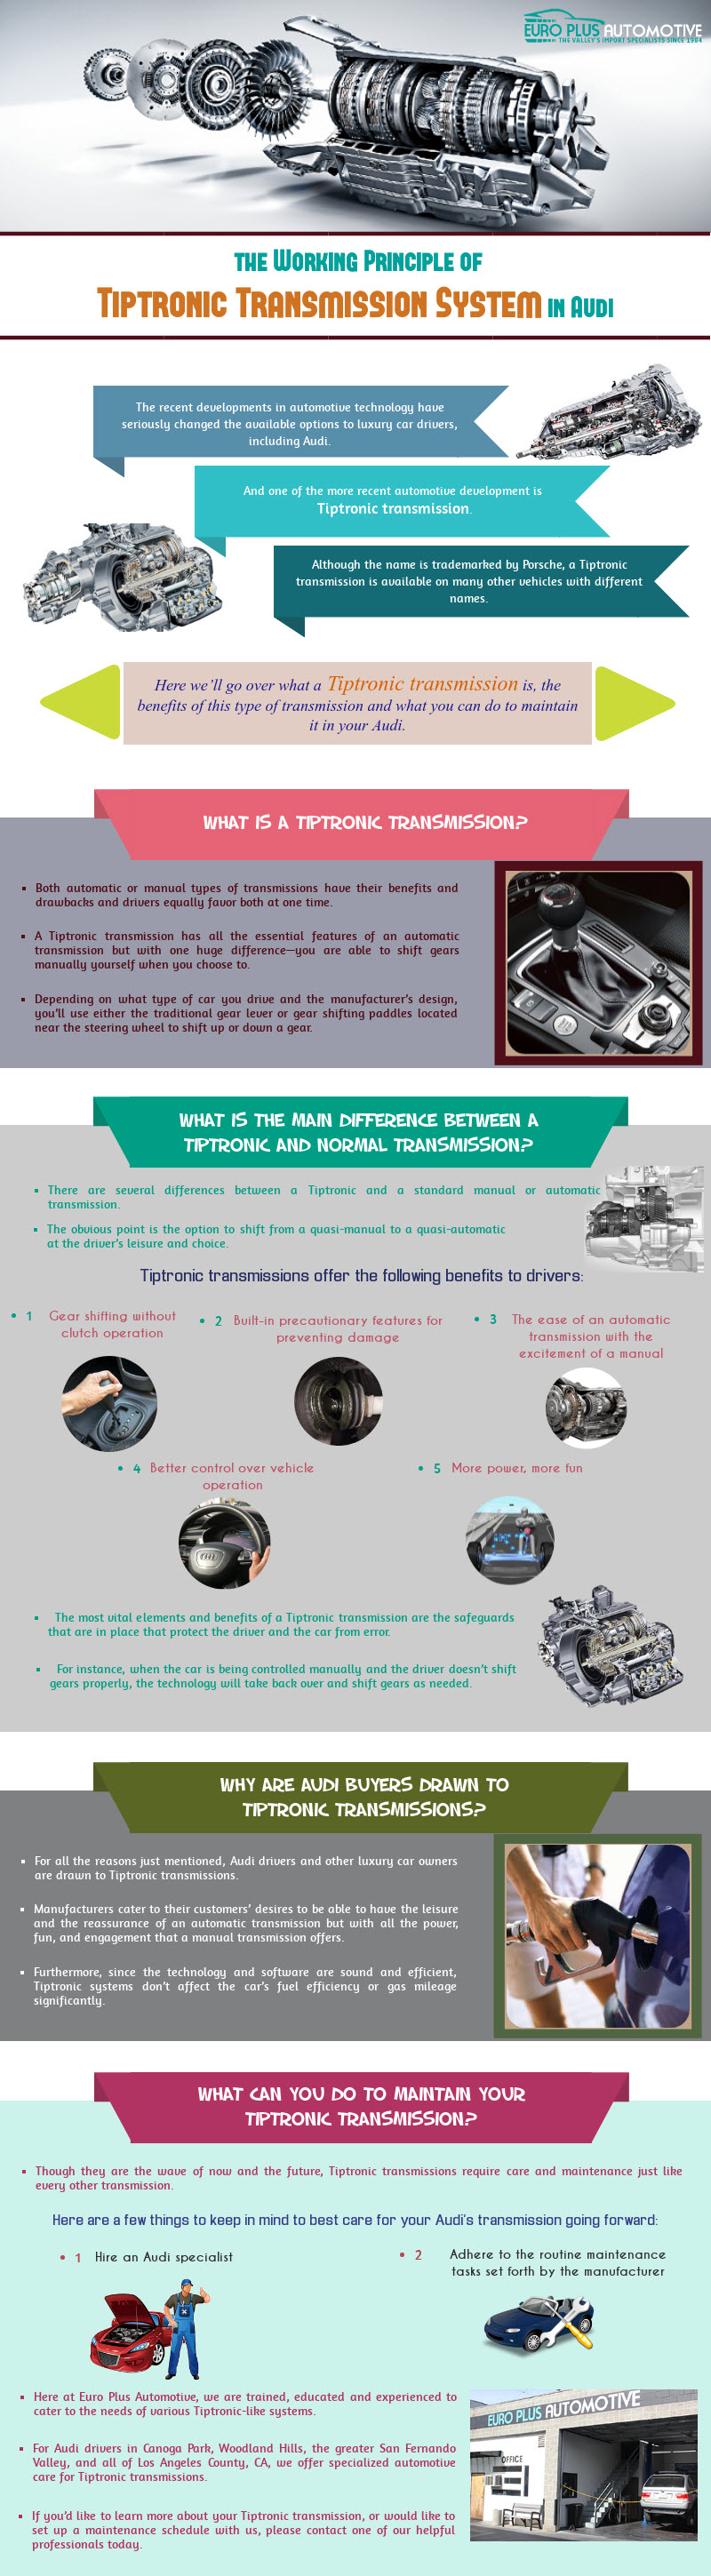 Know the Working Principle of Tiptronic Transmission System in Audi